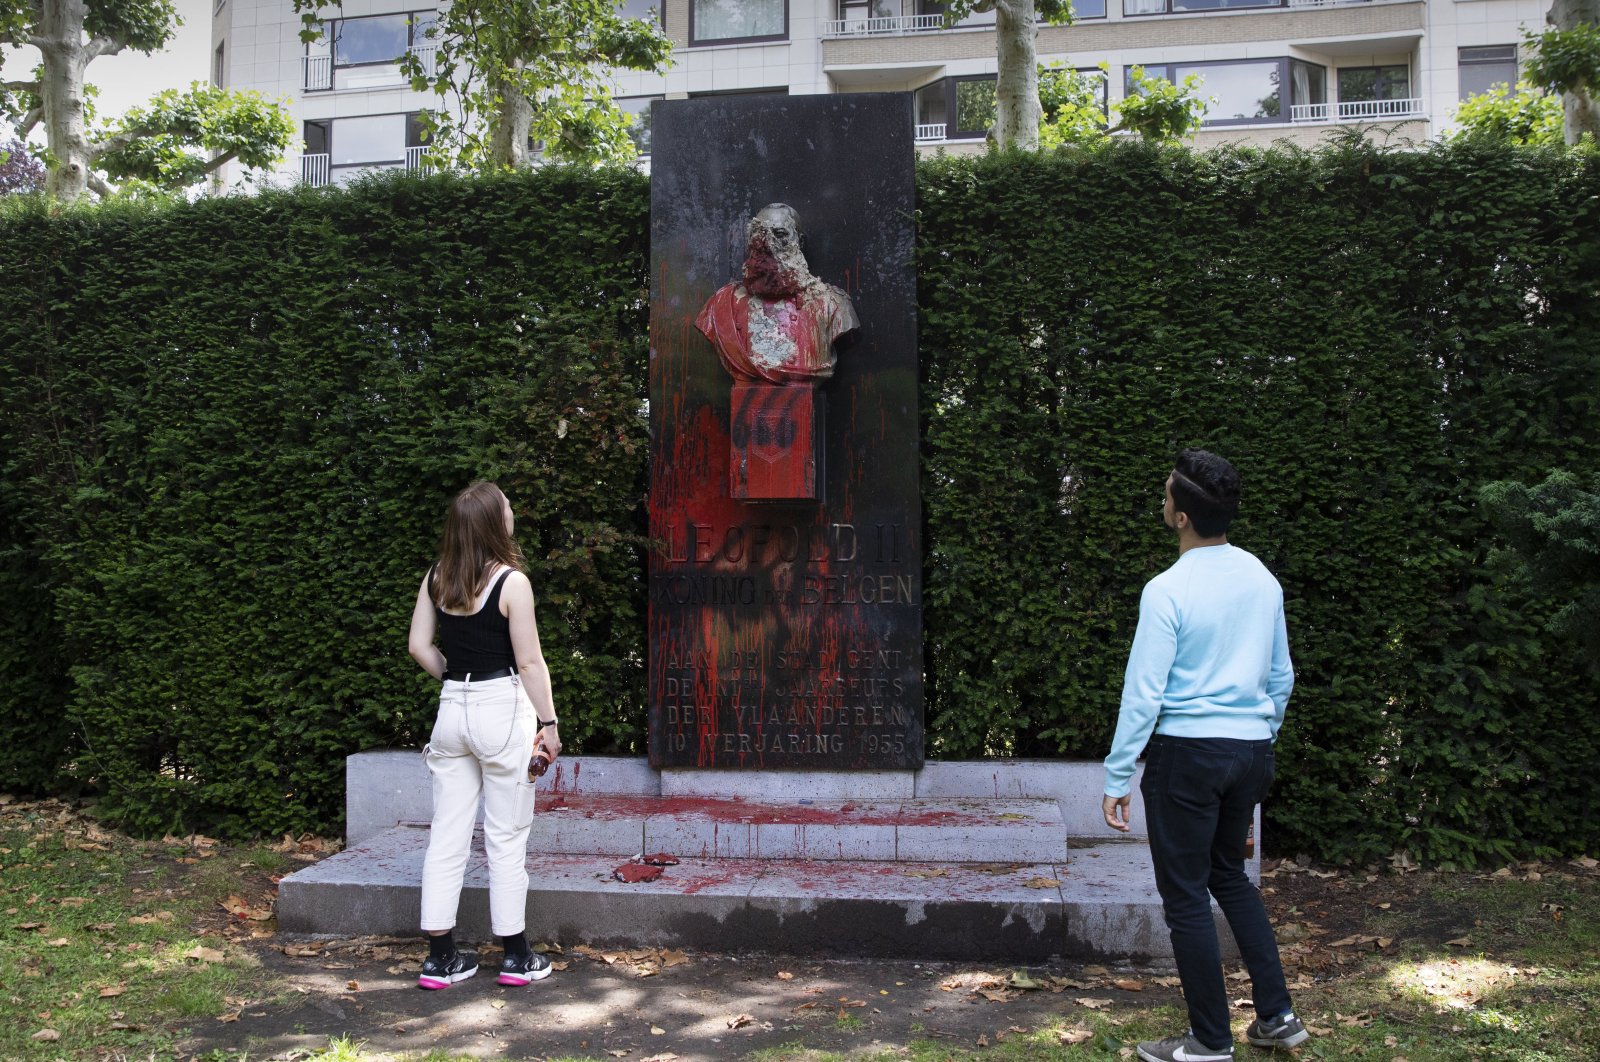 A couple stop to look at a bust of Belgium's King Leopold II, which has been damaged by red paint, graffiti and cement, at a park in Ghent, Belgium on Friday, June 19, 2020. Protests sweeping the world after George Floyd's death in the U.S. have added fuel to a movement to confront Europe's role in the slave trade and its colonial past.(AP Photo)